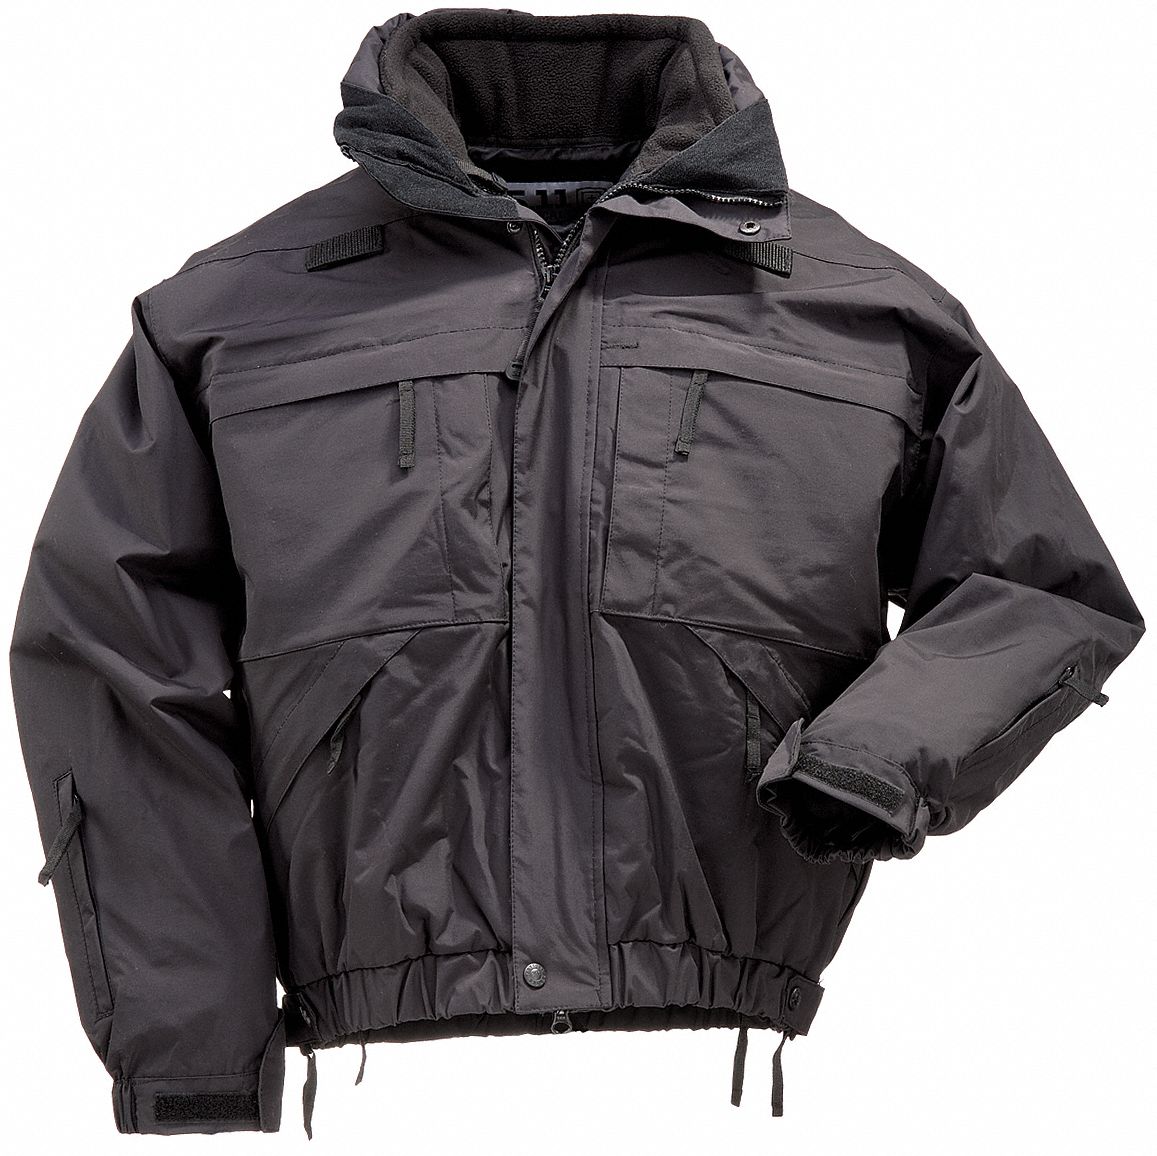 5.11 TACTICAL 5 in 1 Jacket, 4XL Fits Chest Size 58 in to 60 in, Black ...